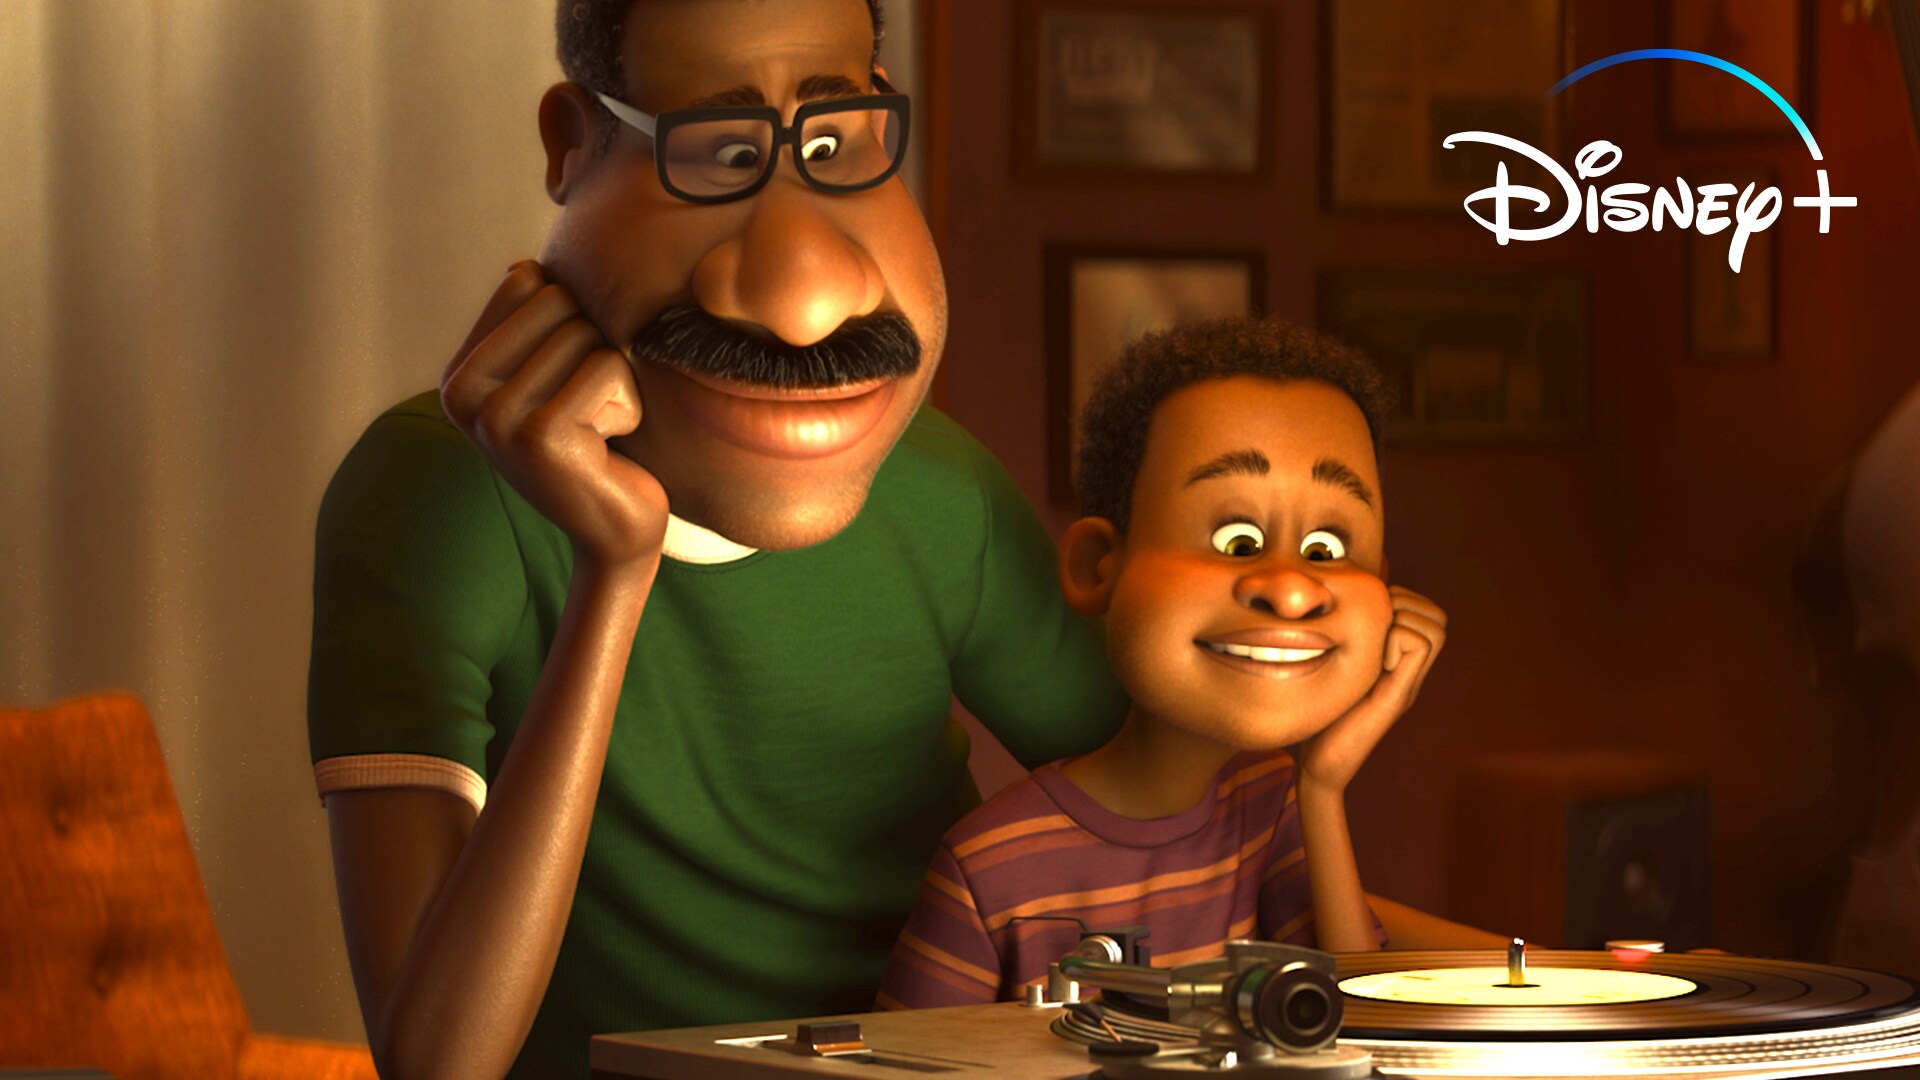 To All the Dads | Disney+